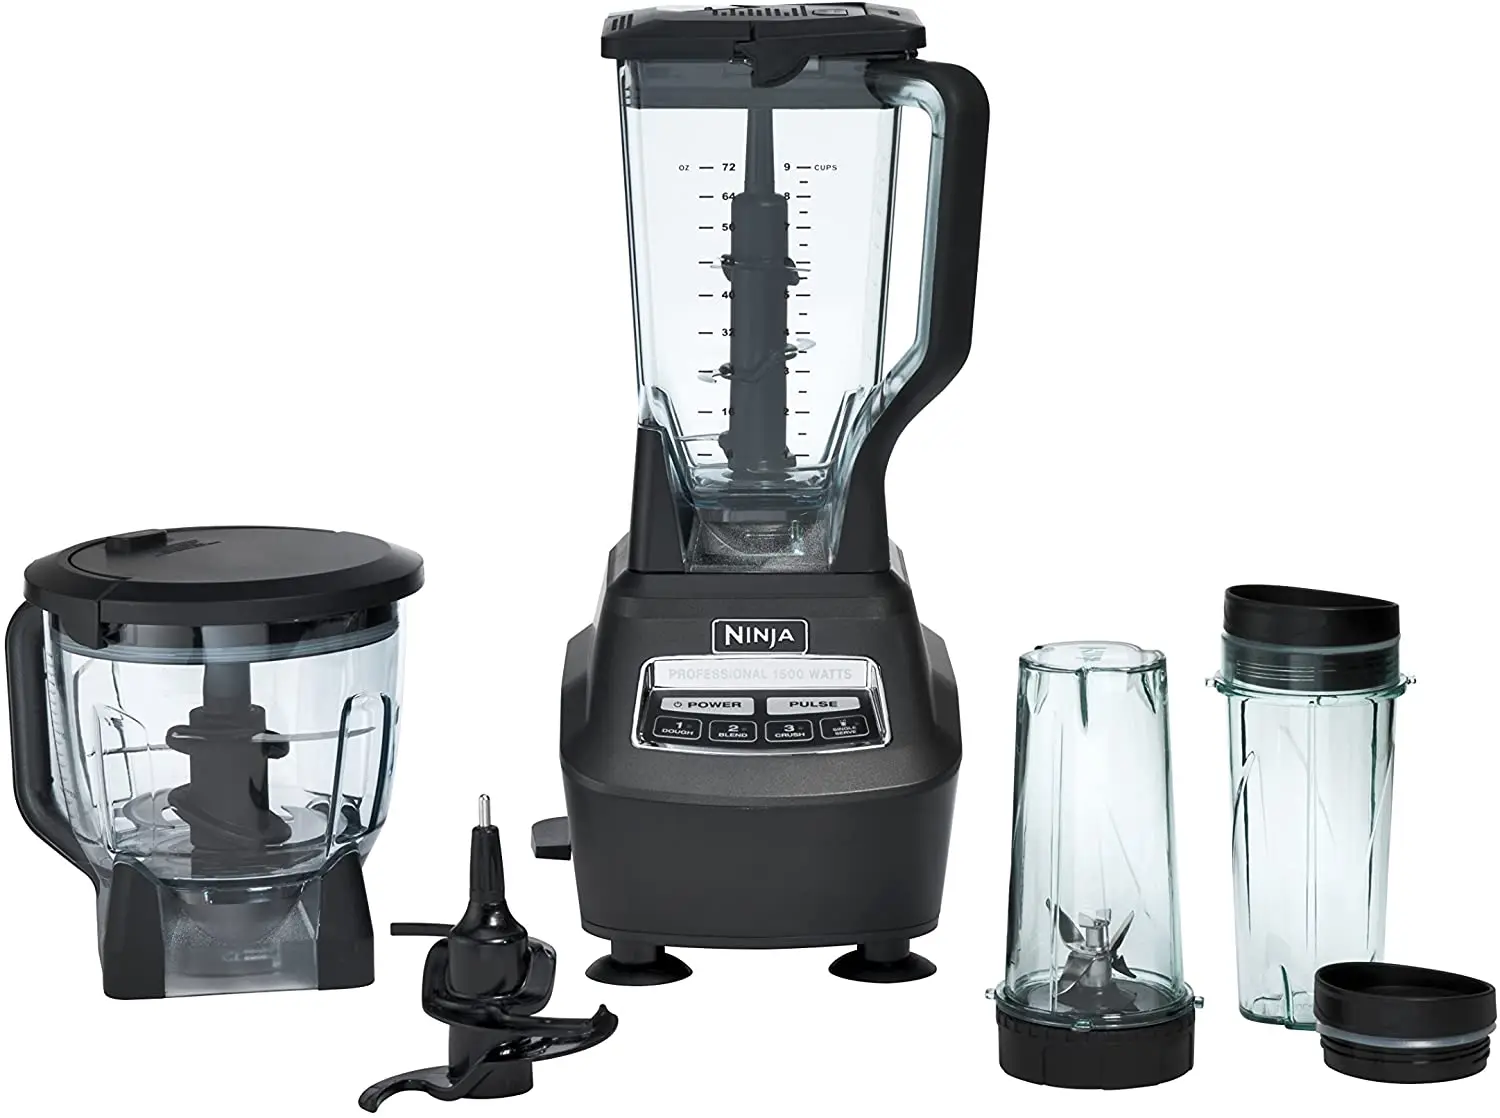 

BL770 Mega Kitchen System, 1500W, 4 Functions for Smoothies, Processing, Dough, Drinks & More, with 72-oz.* Blender Pitcher,